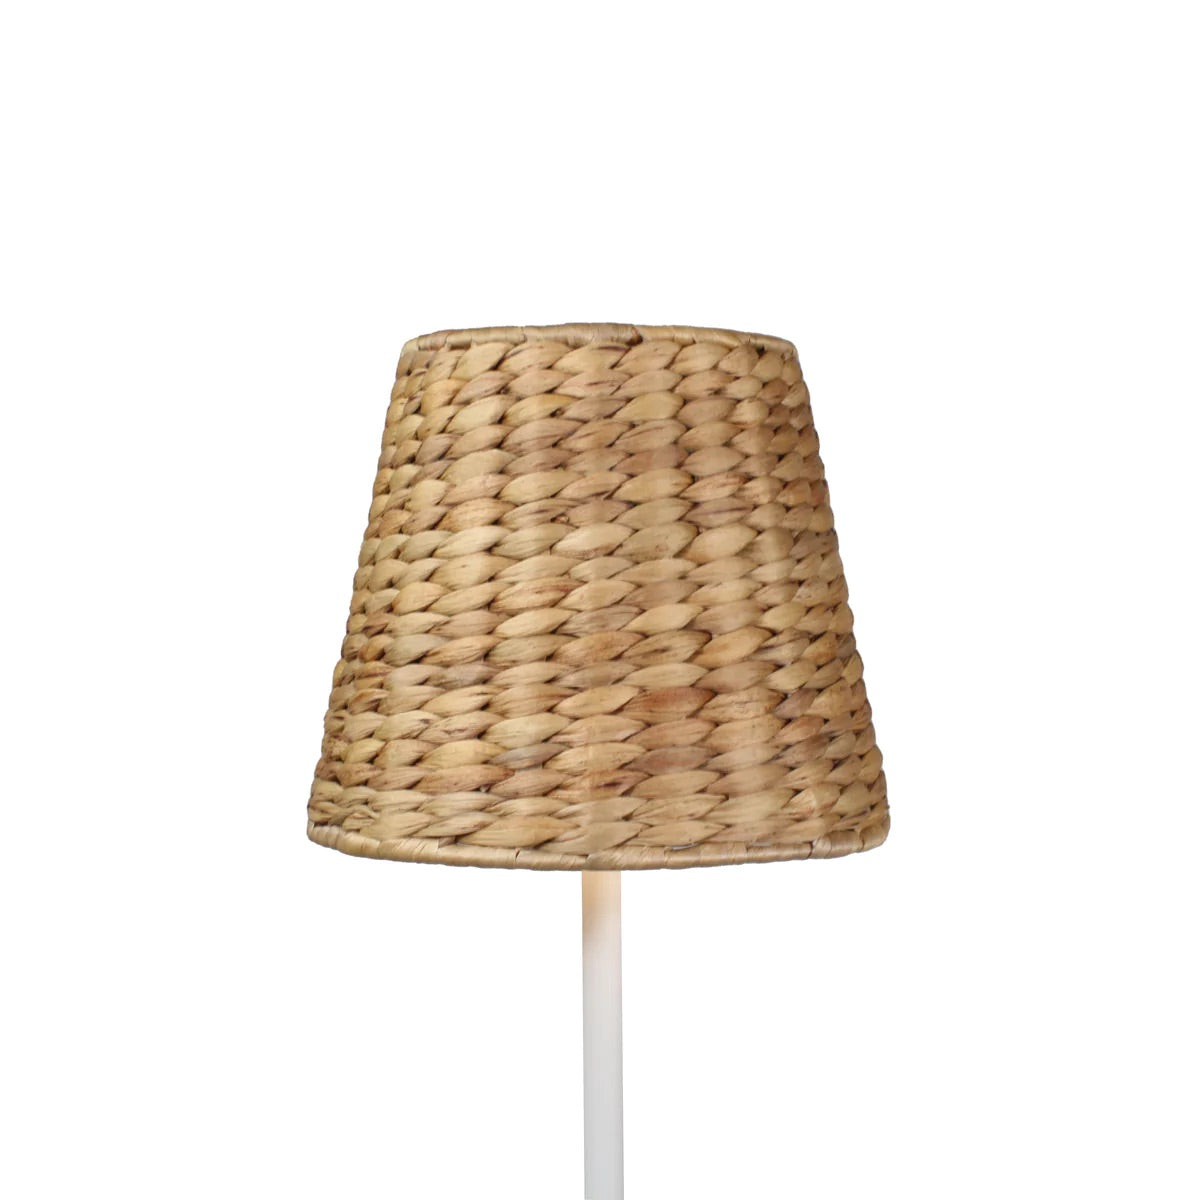 Hyacinth and Seagrass Shades for Poldina Lamps